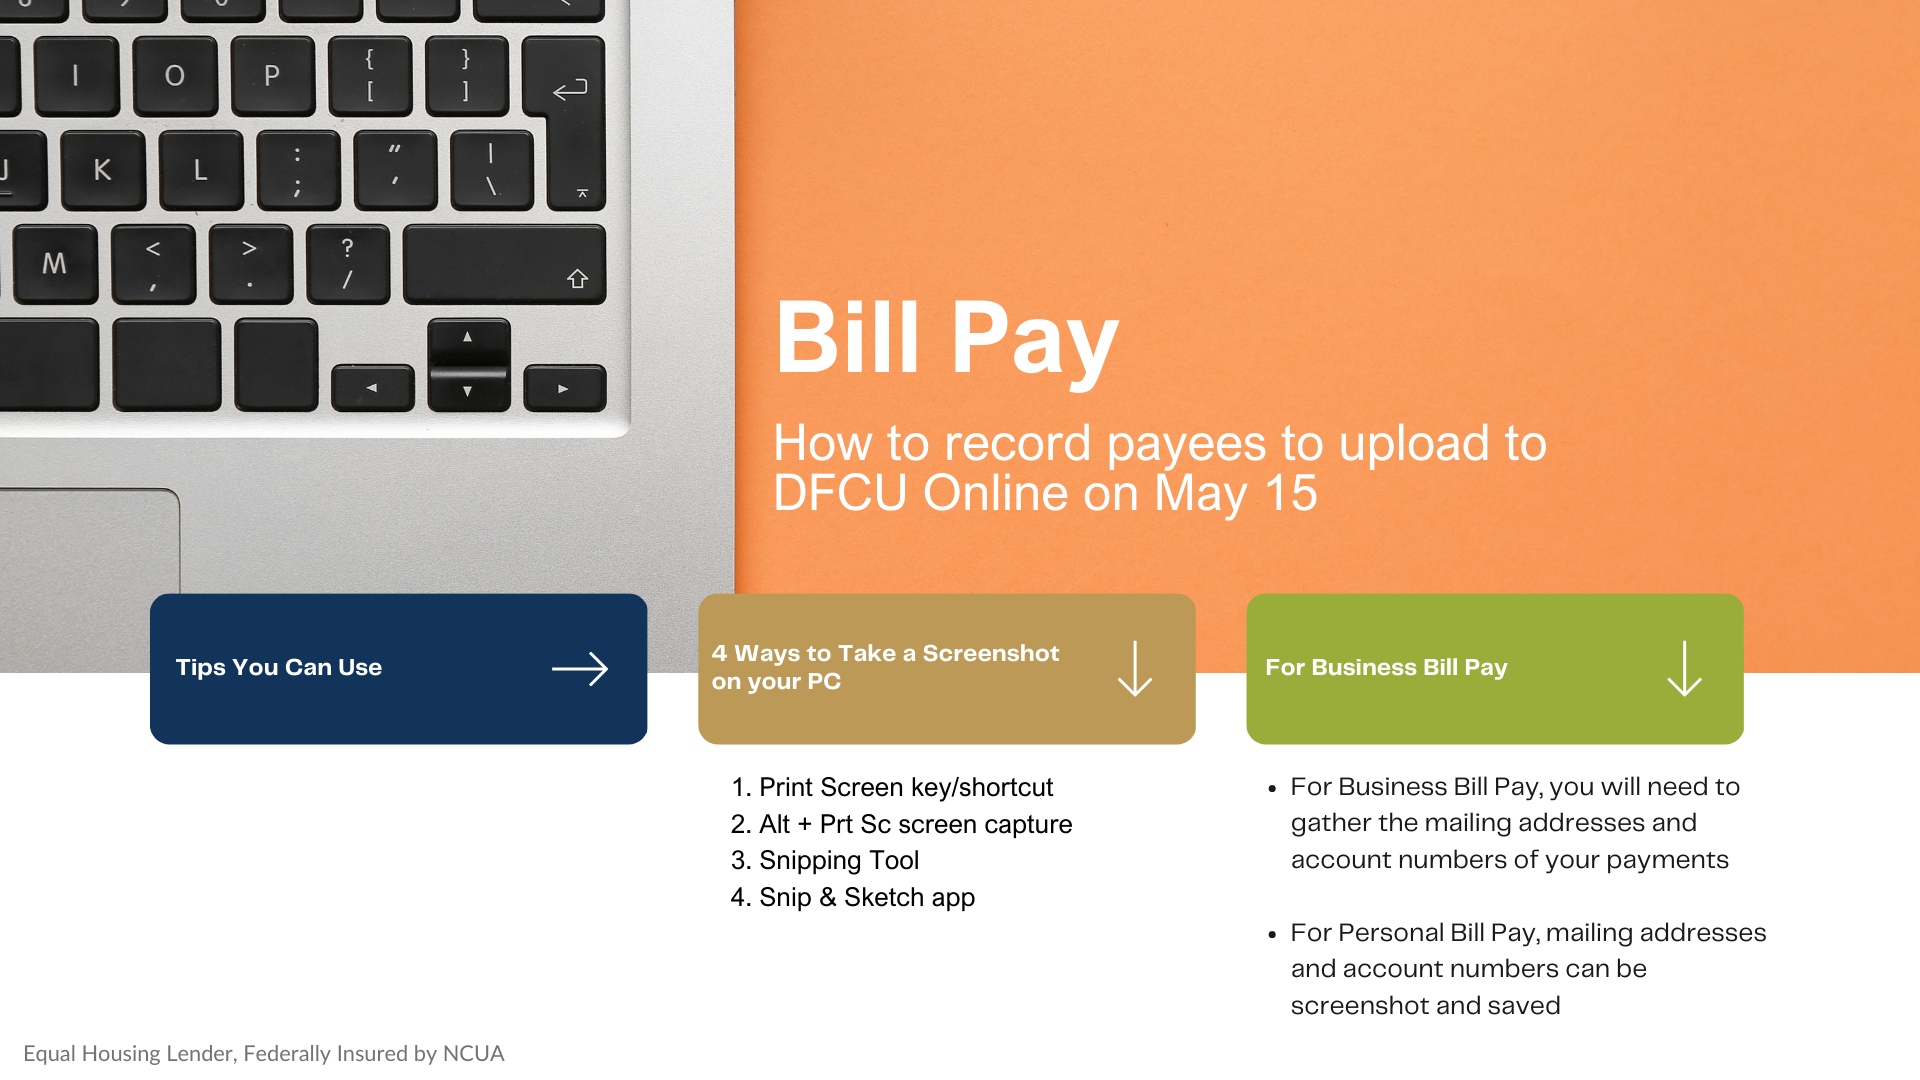 For Business Bill Pay